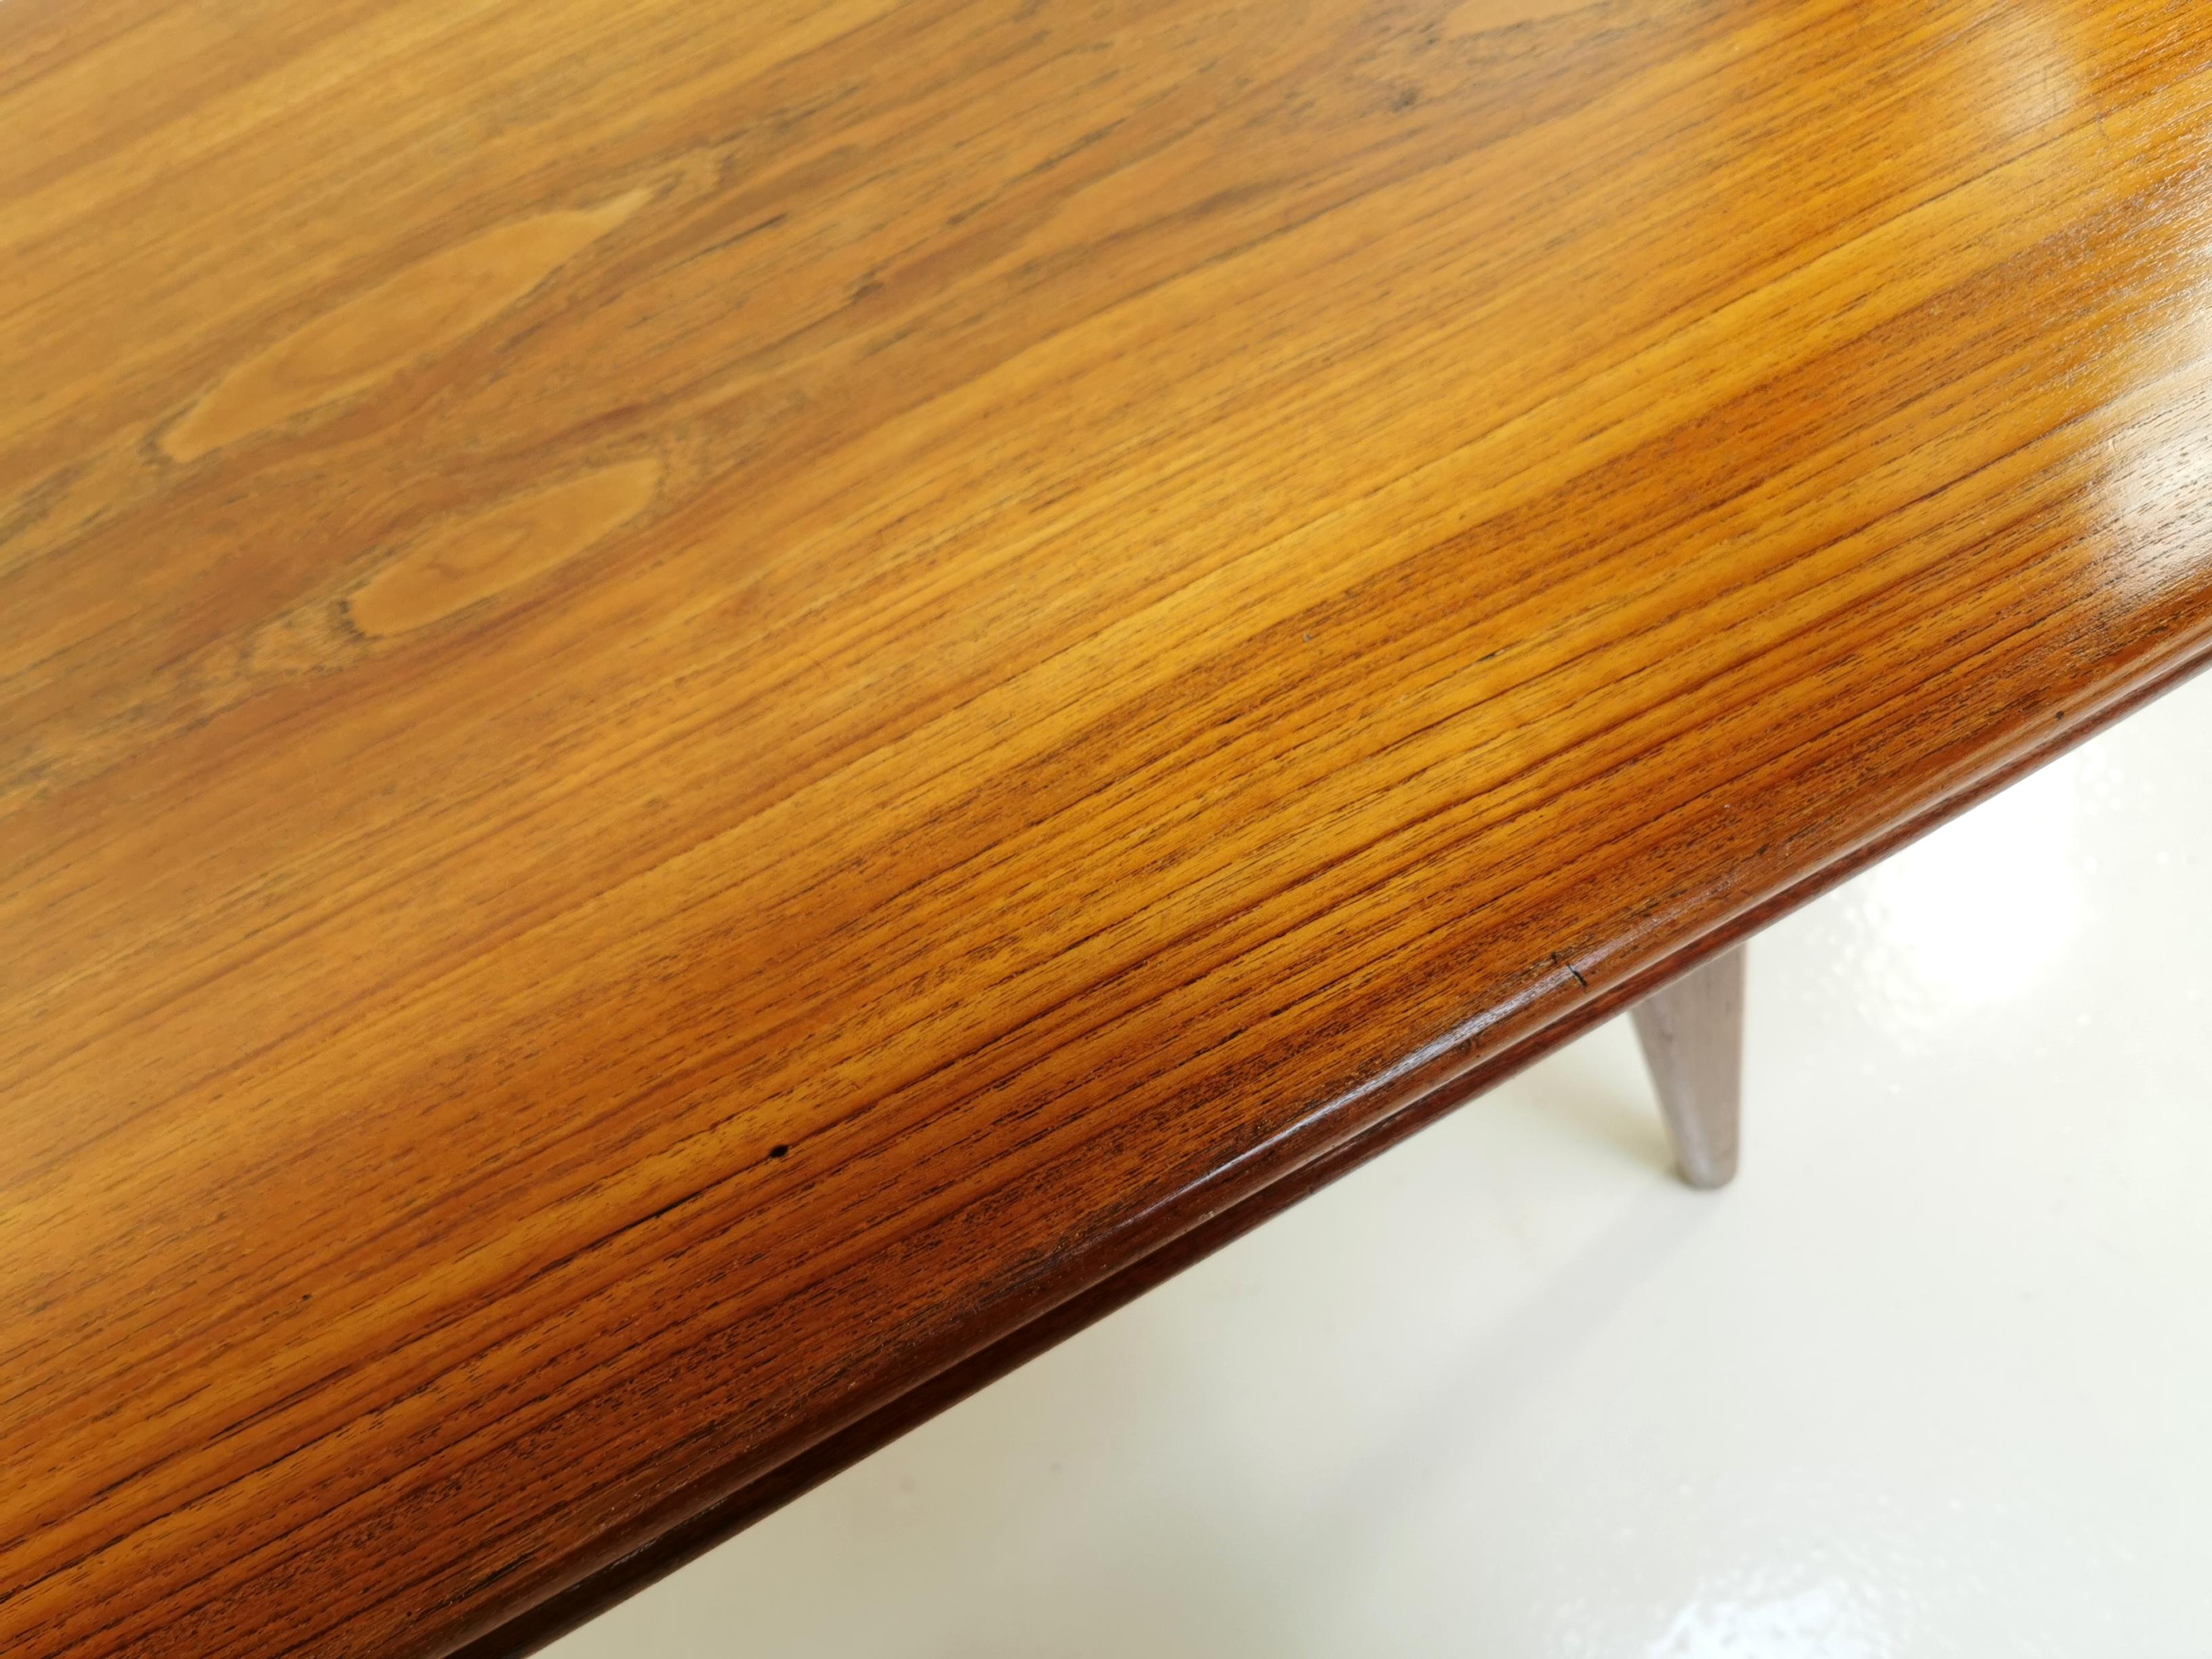 About this item
Metamorphic teak dining table from the 1960s. Splayed legs with detailed joints make this much more desirable than others currently on the market.

Know as the elevator table, and the innovative design sees the coffee table